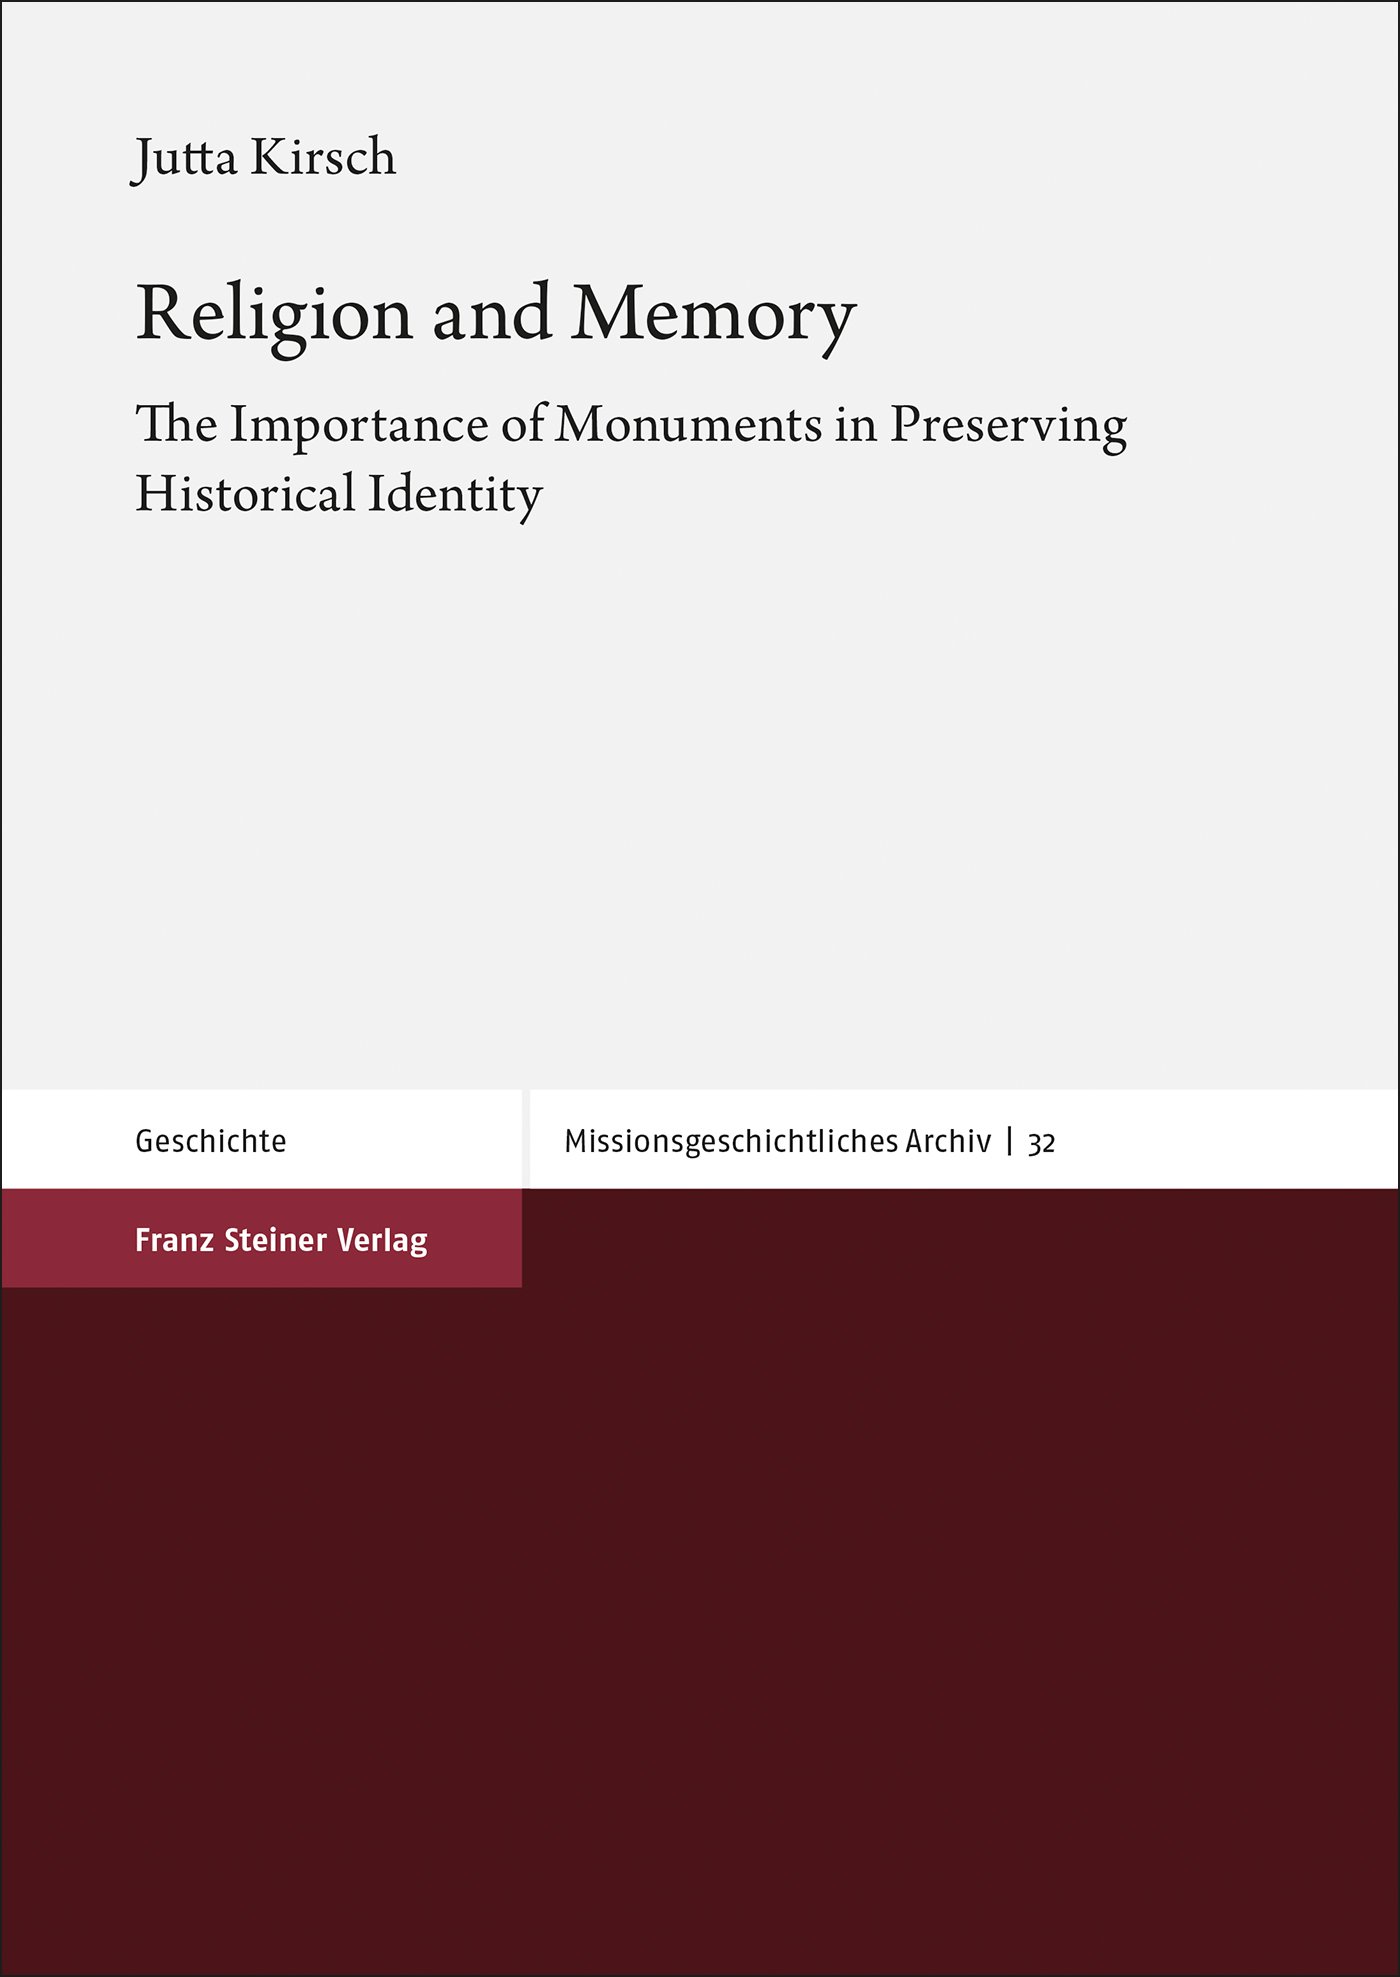 Religion and Memory